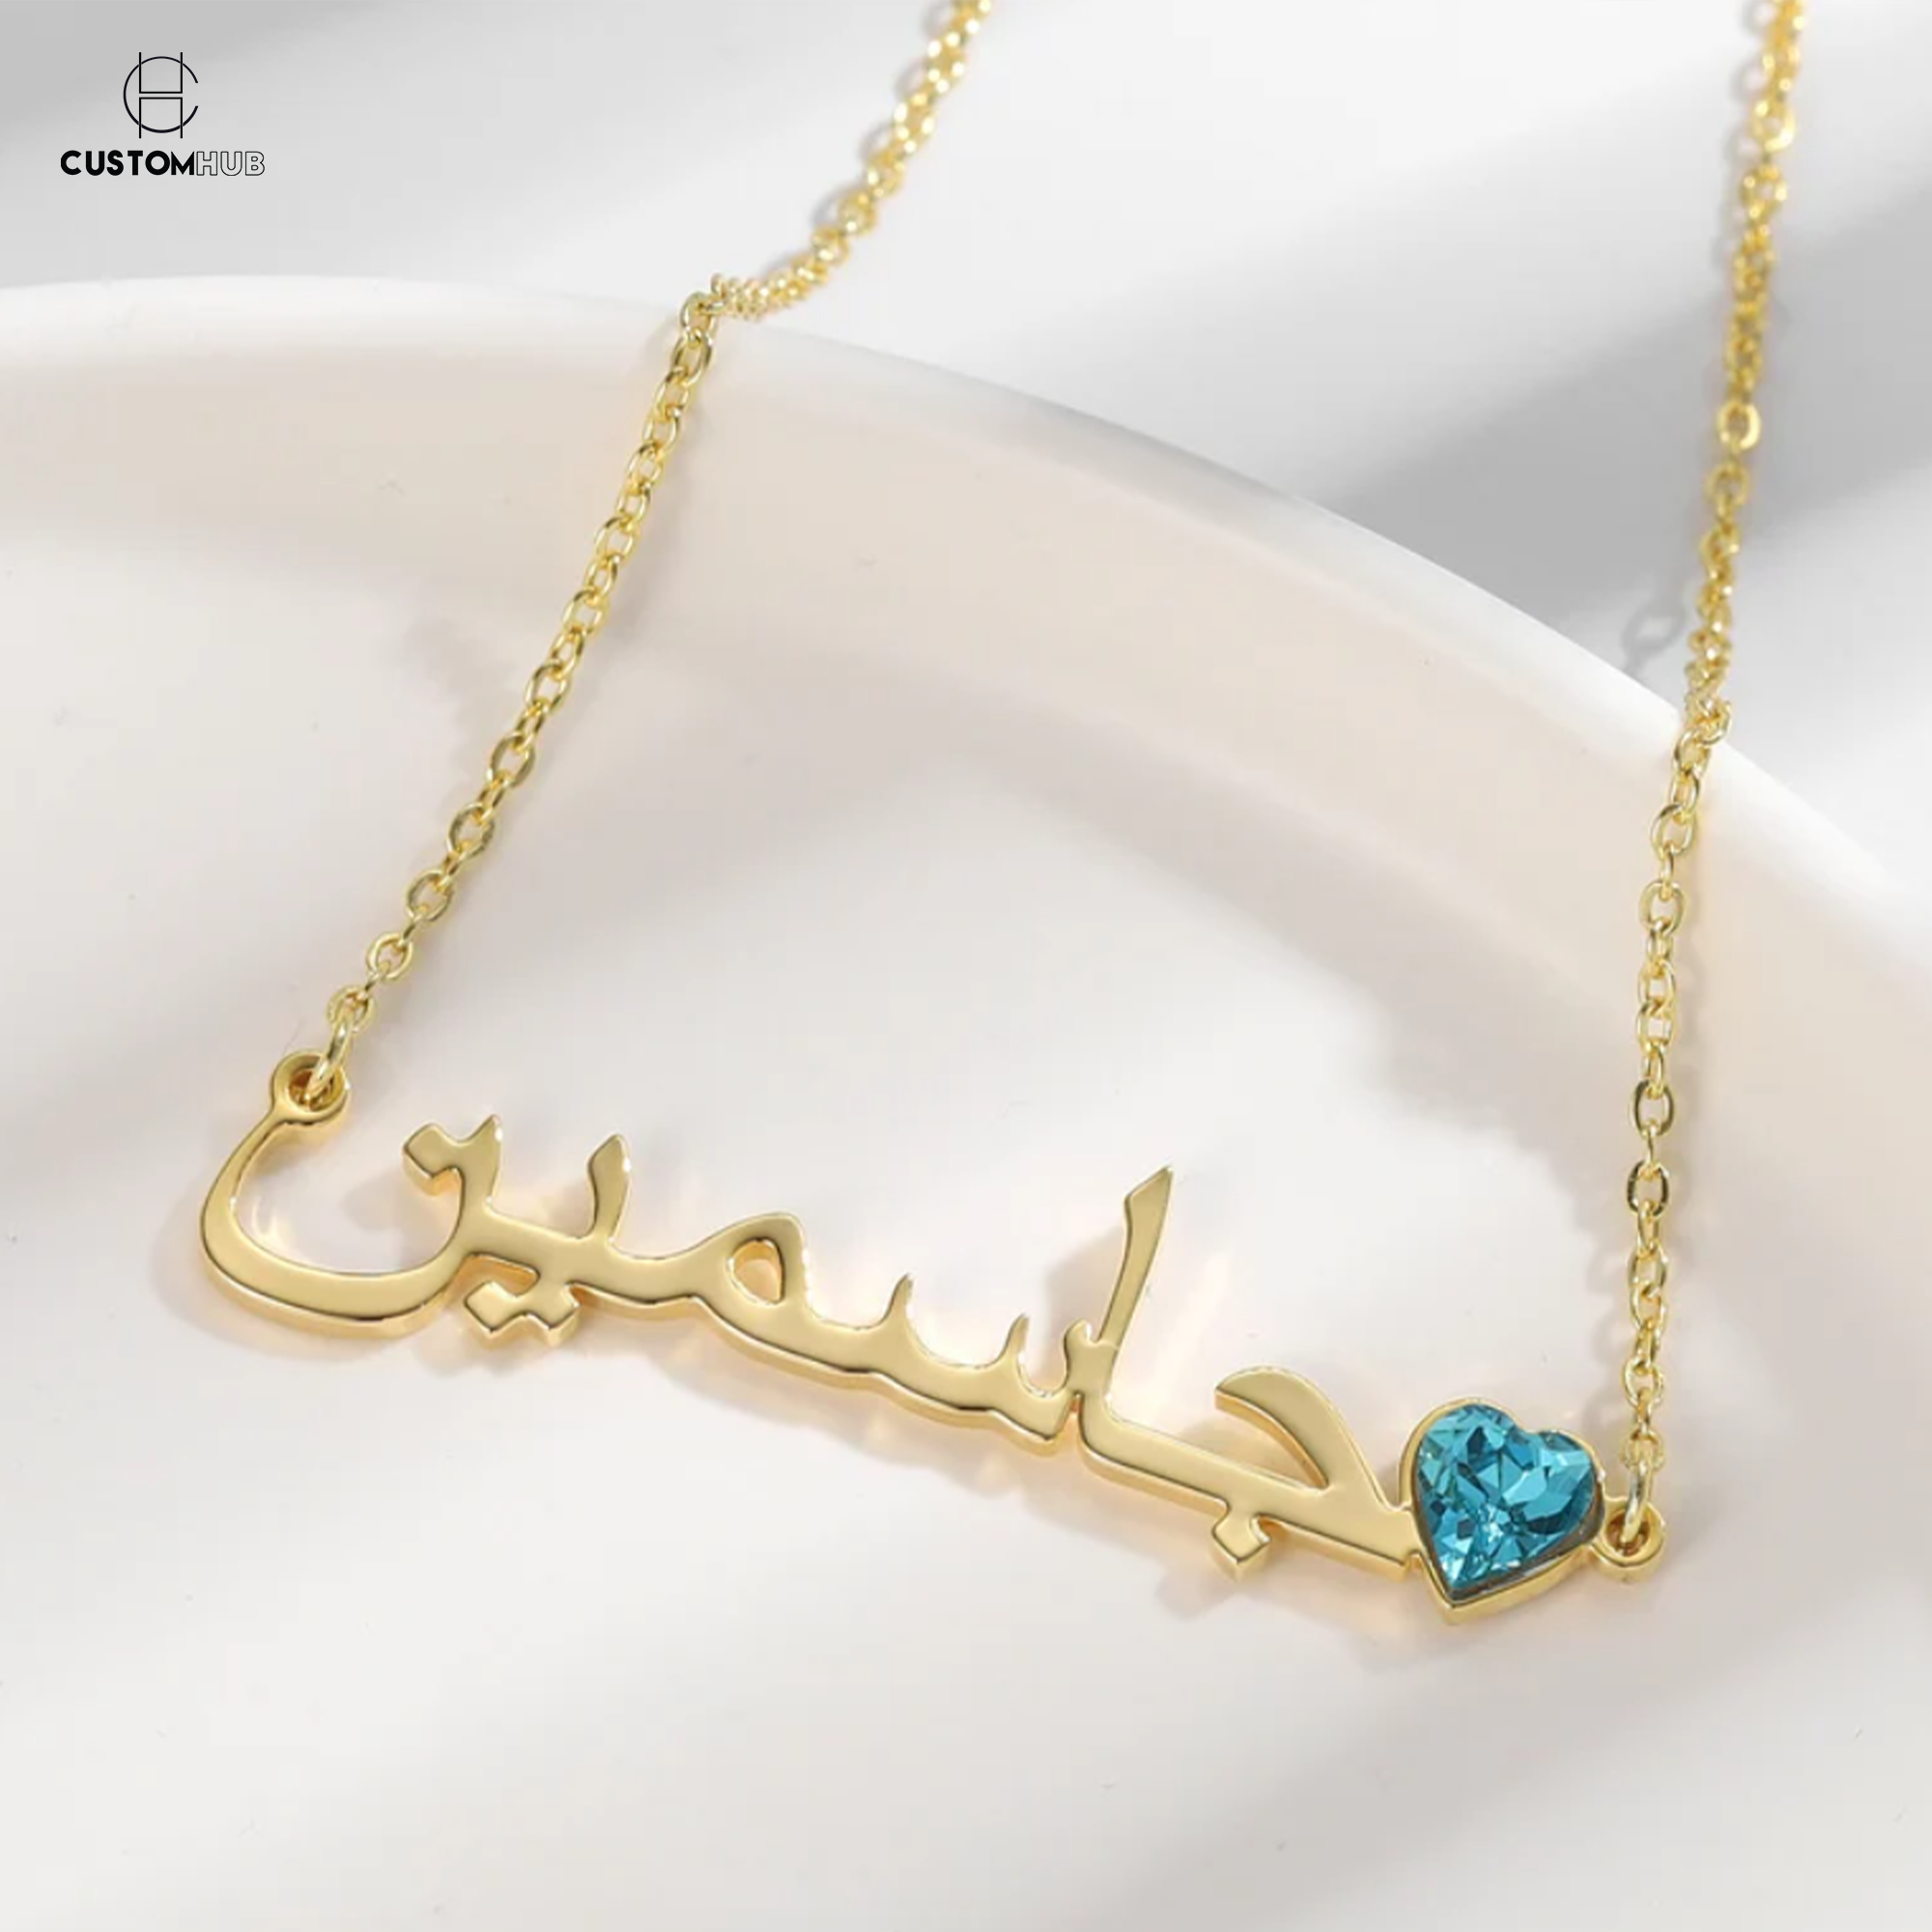 Personalized Arabic Name Necklace with Birthstone